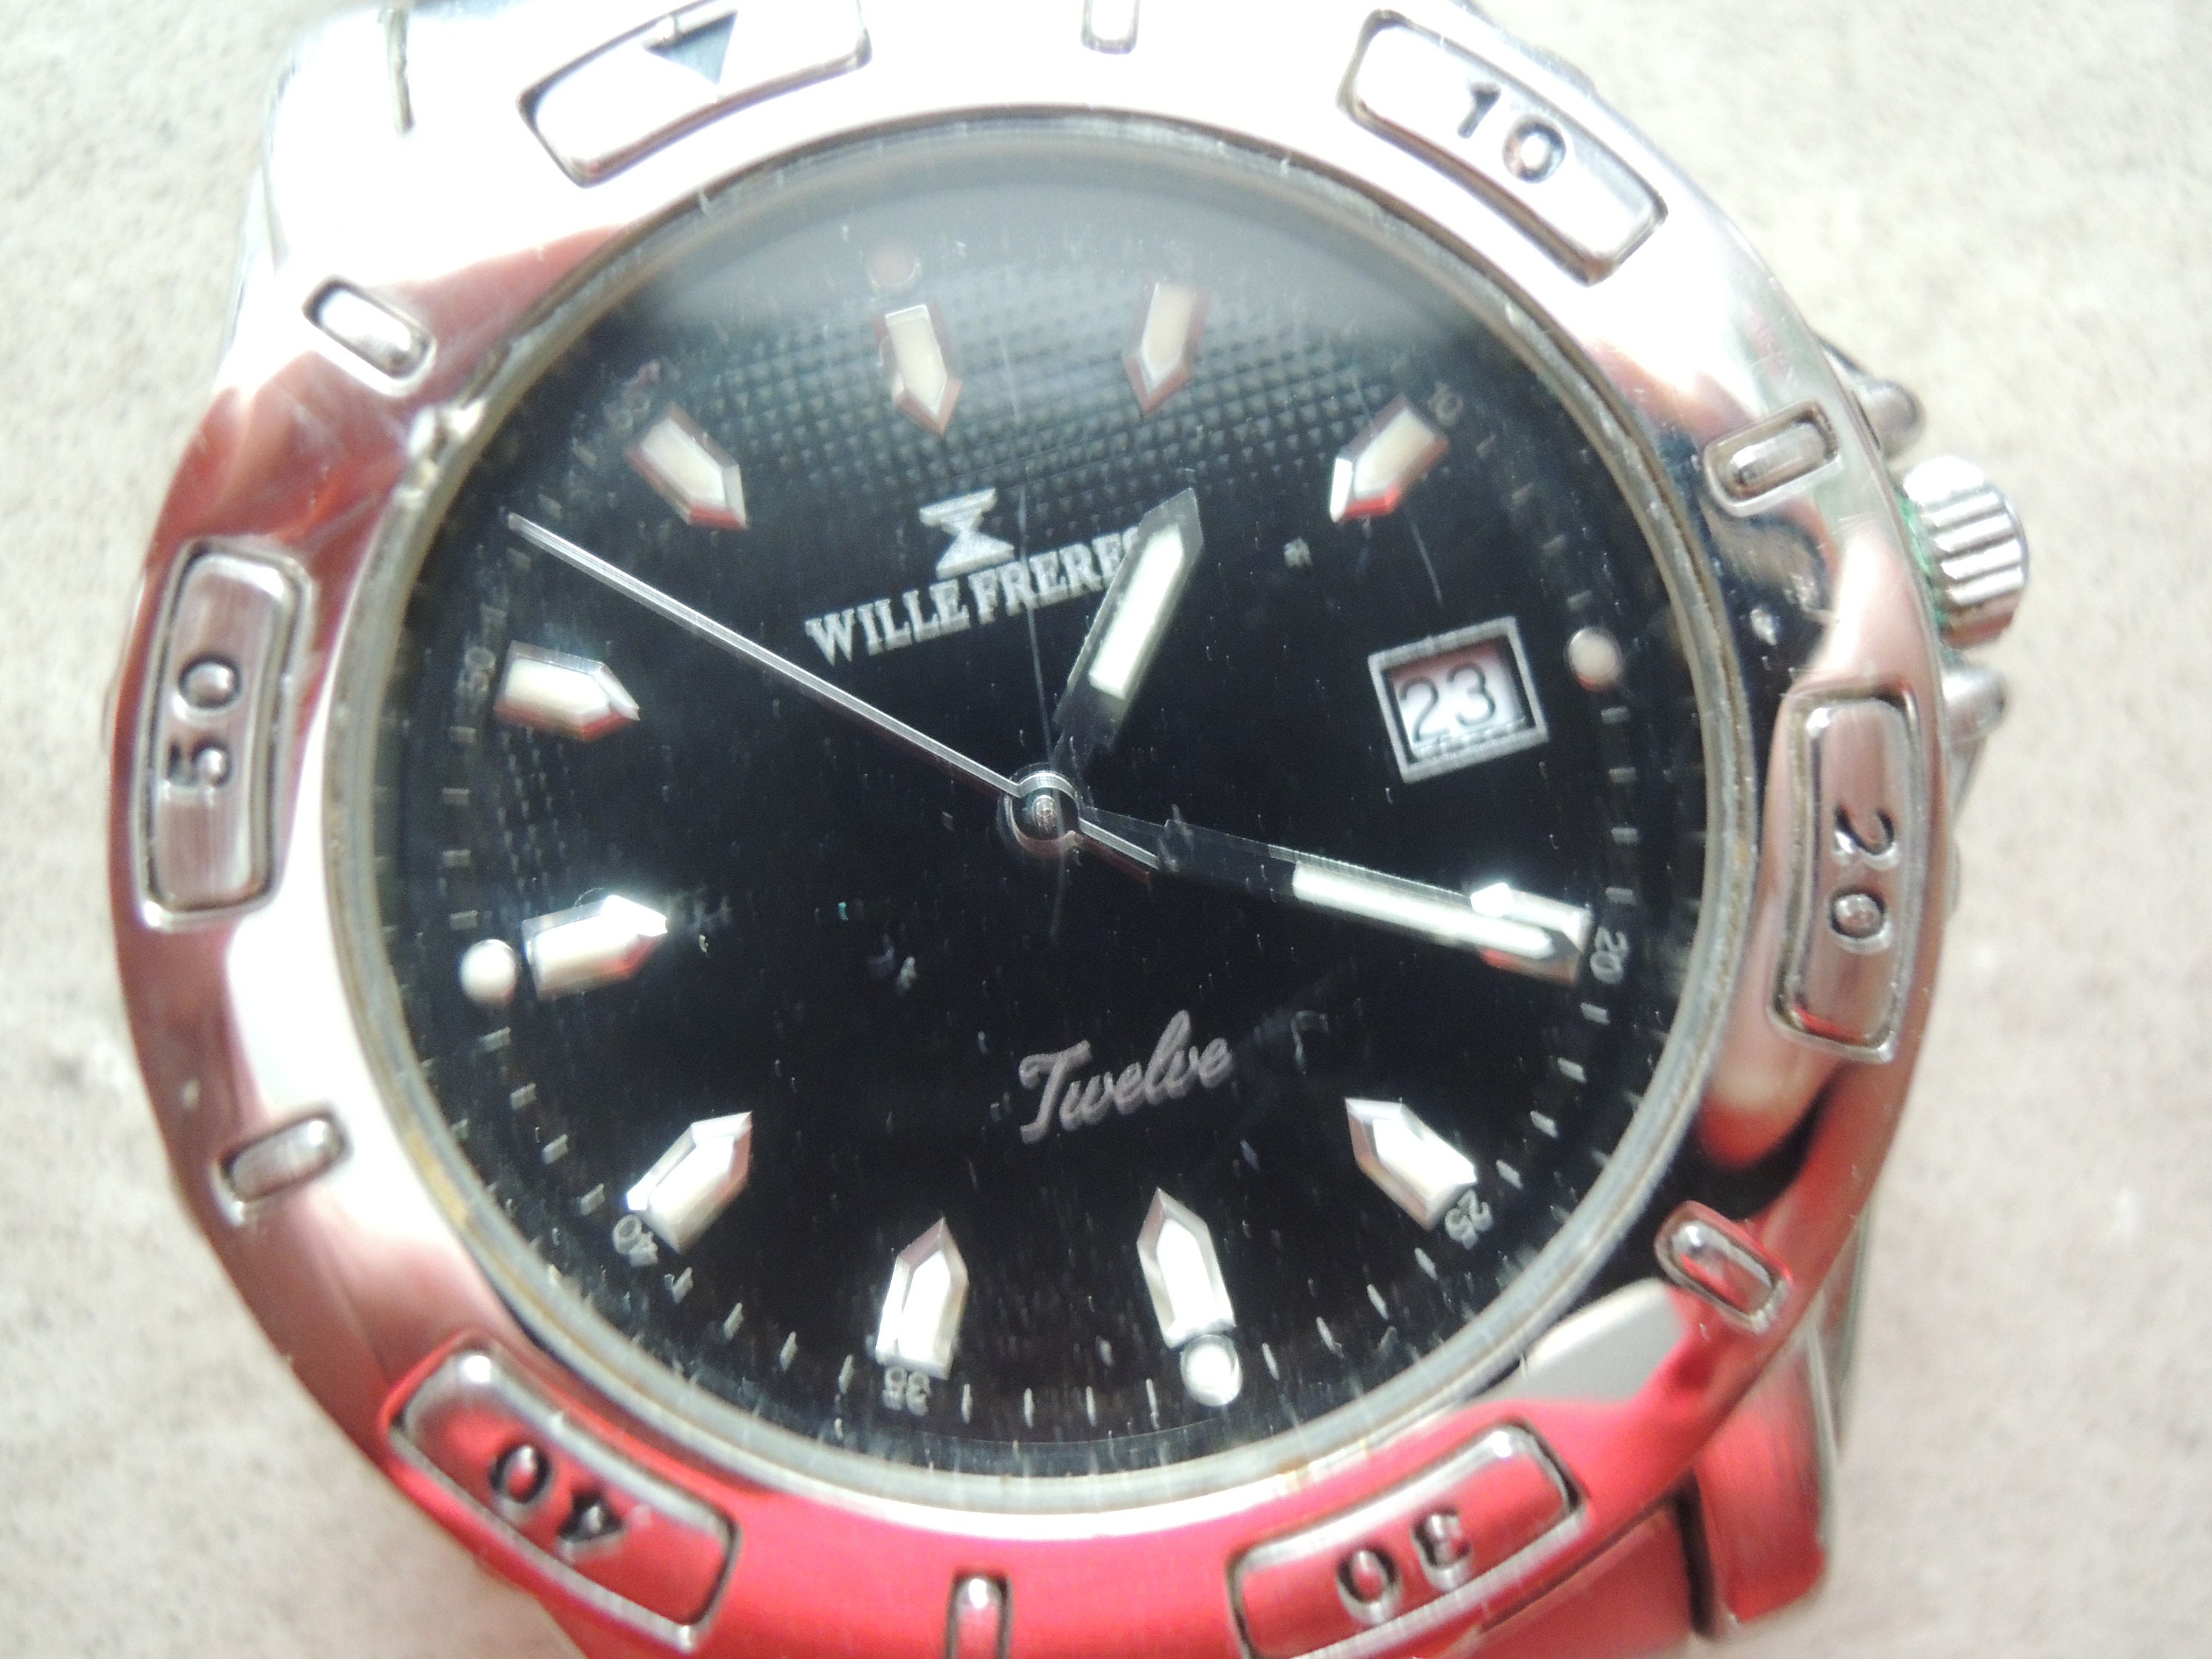 Mens Wille Freres twelve wrist watch all Stainless Quartz.Clean condition with SS quality bracelet  A Reliable Rare find in Best watches. Jewellery Watches Wrist Watches Mens Wrist Watches 